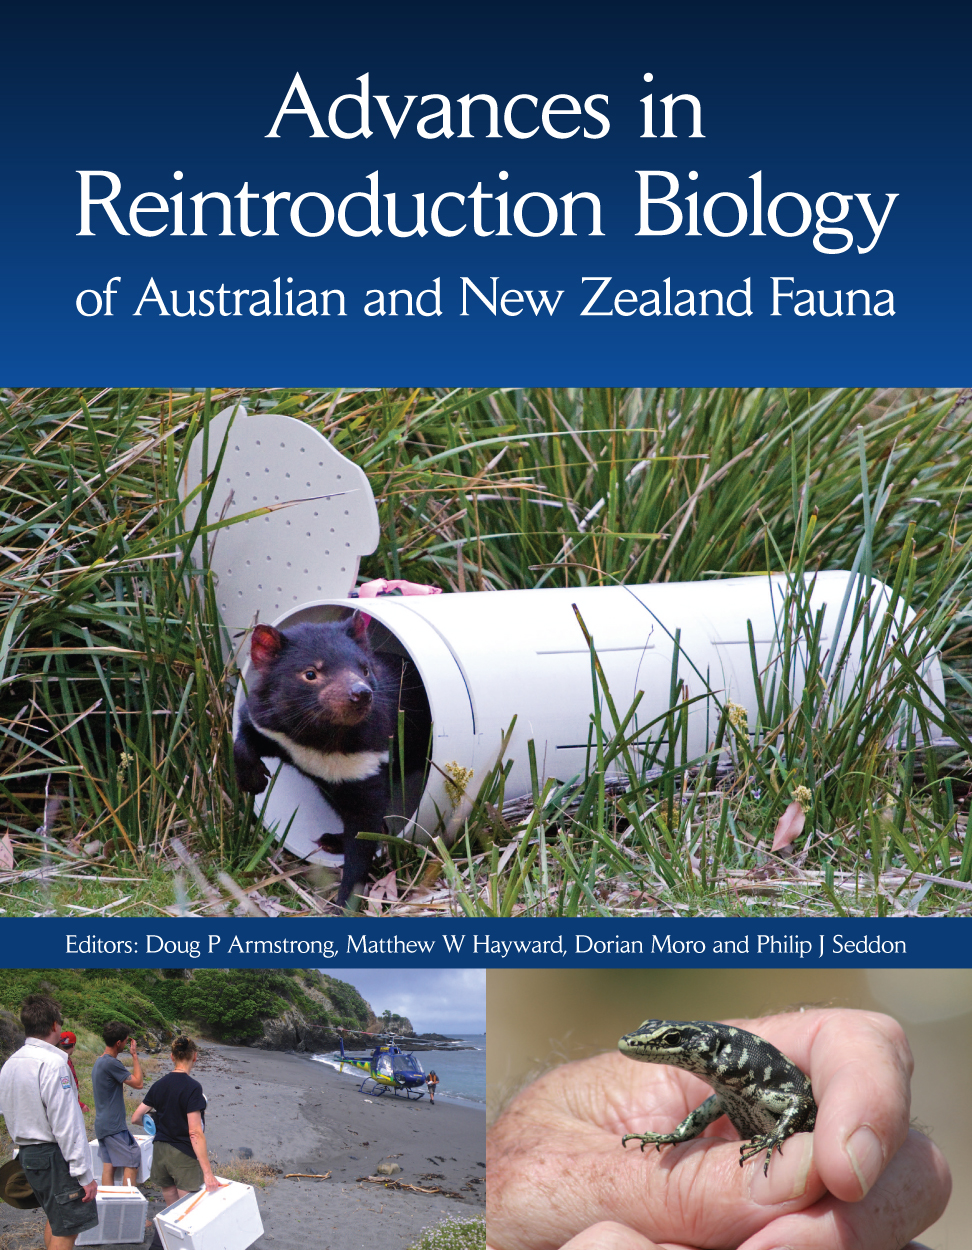 Cover image showing Tasmanian Devil being released from tube into a field and two smaller pictures showing fauna reintroduction, on blue background.